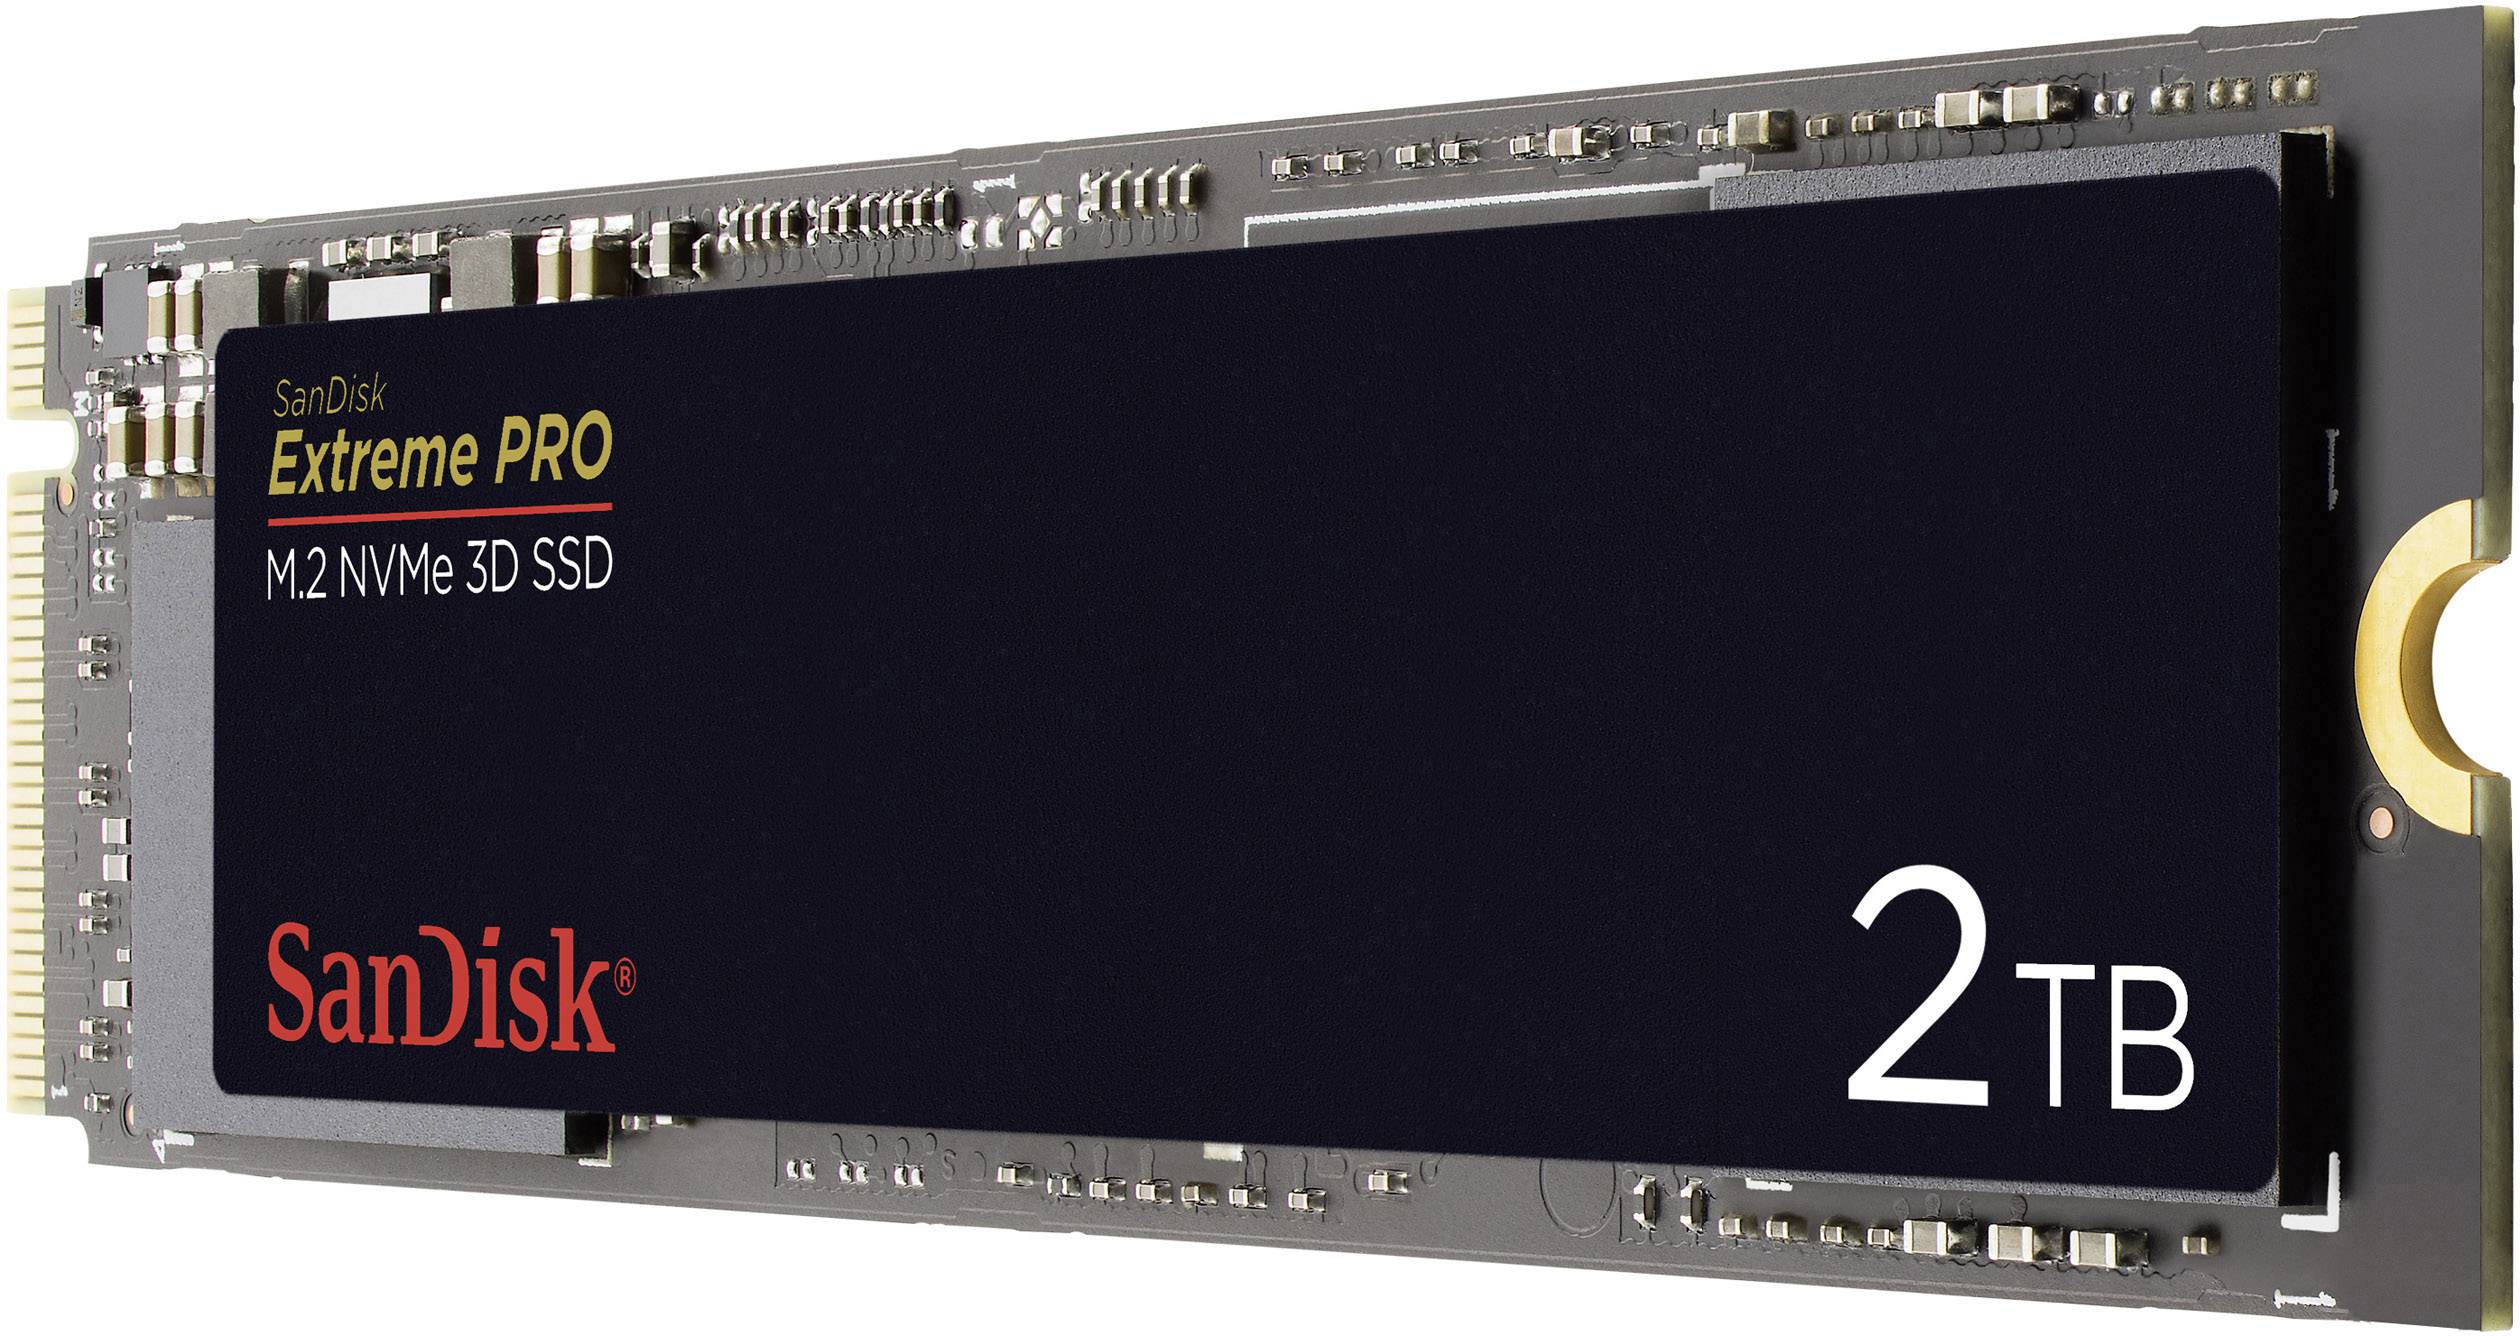 SanDisk Extreme PRO® 3D NVMe/PCIe M.2 SSD 2280 harde schijf 2 TB M.2